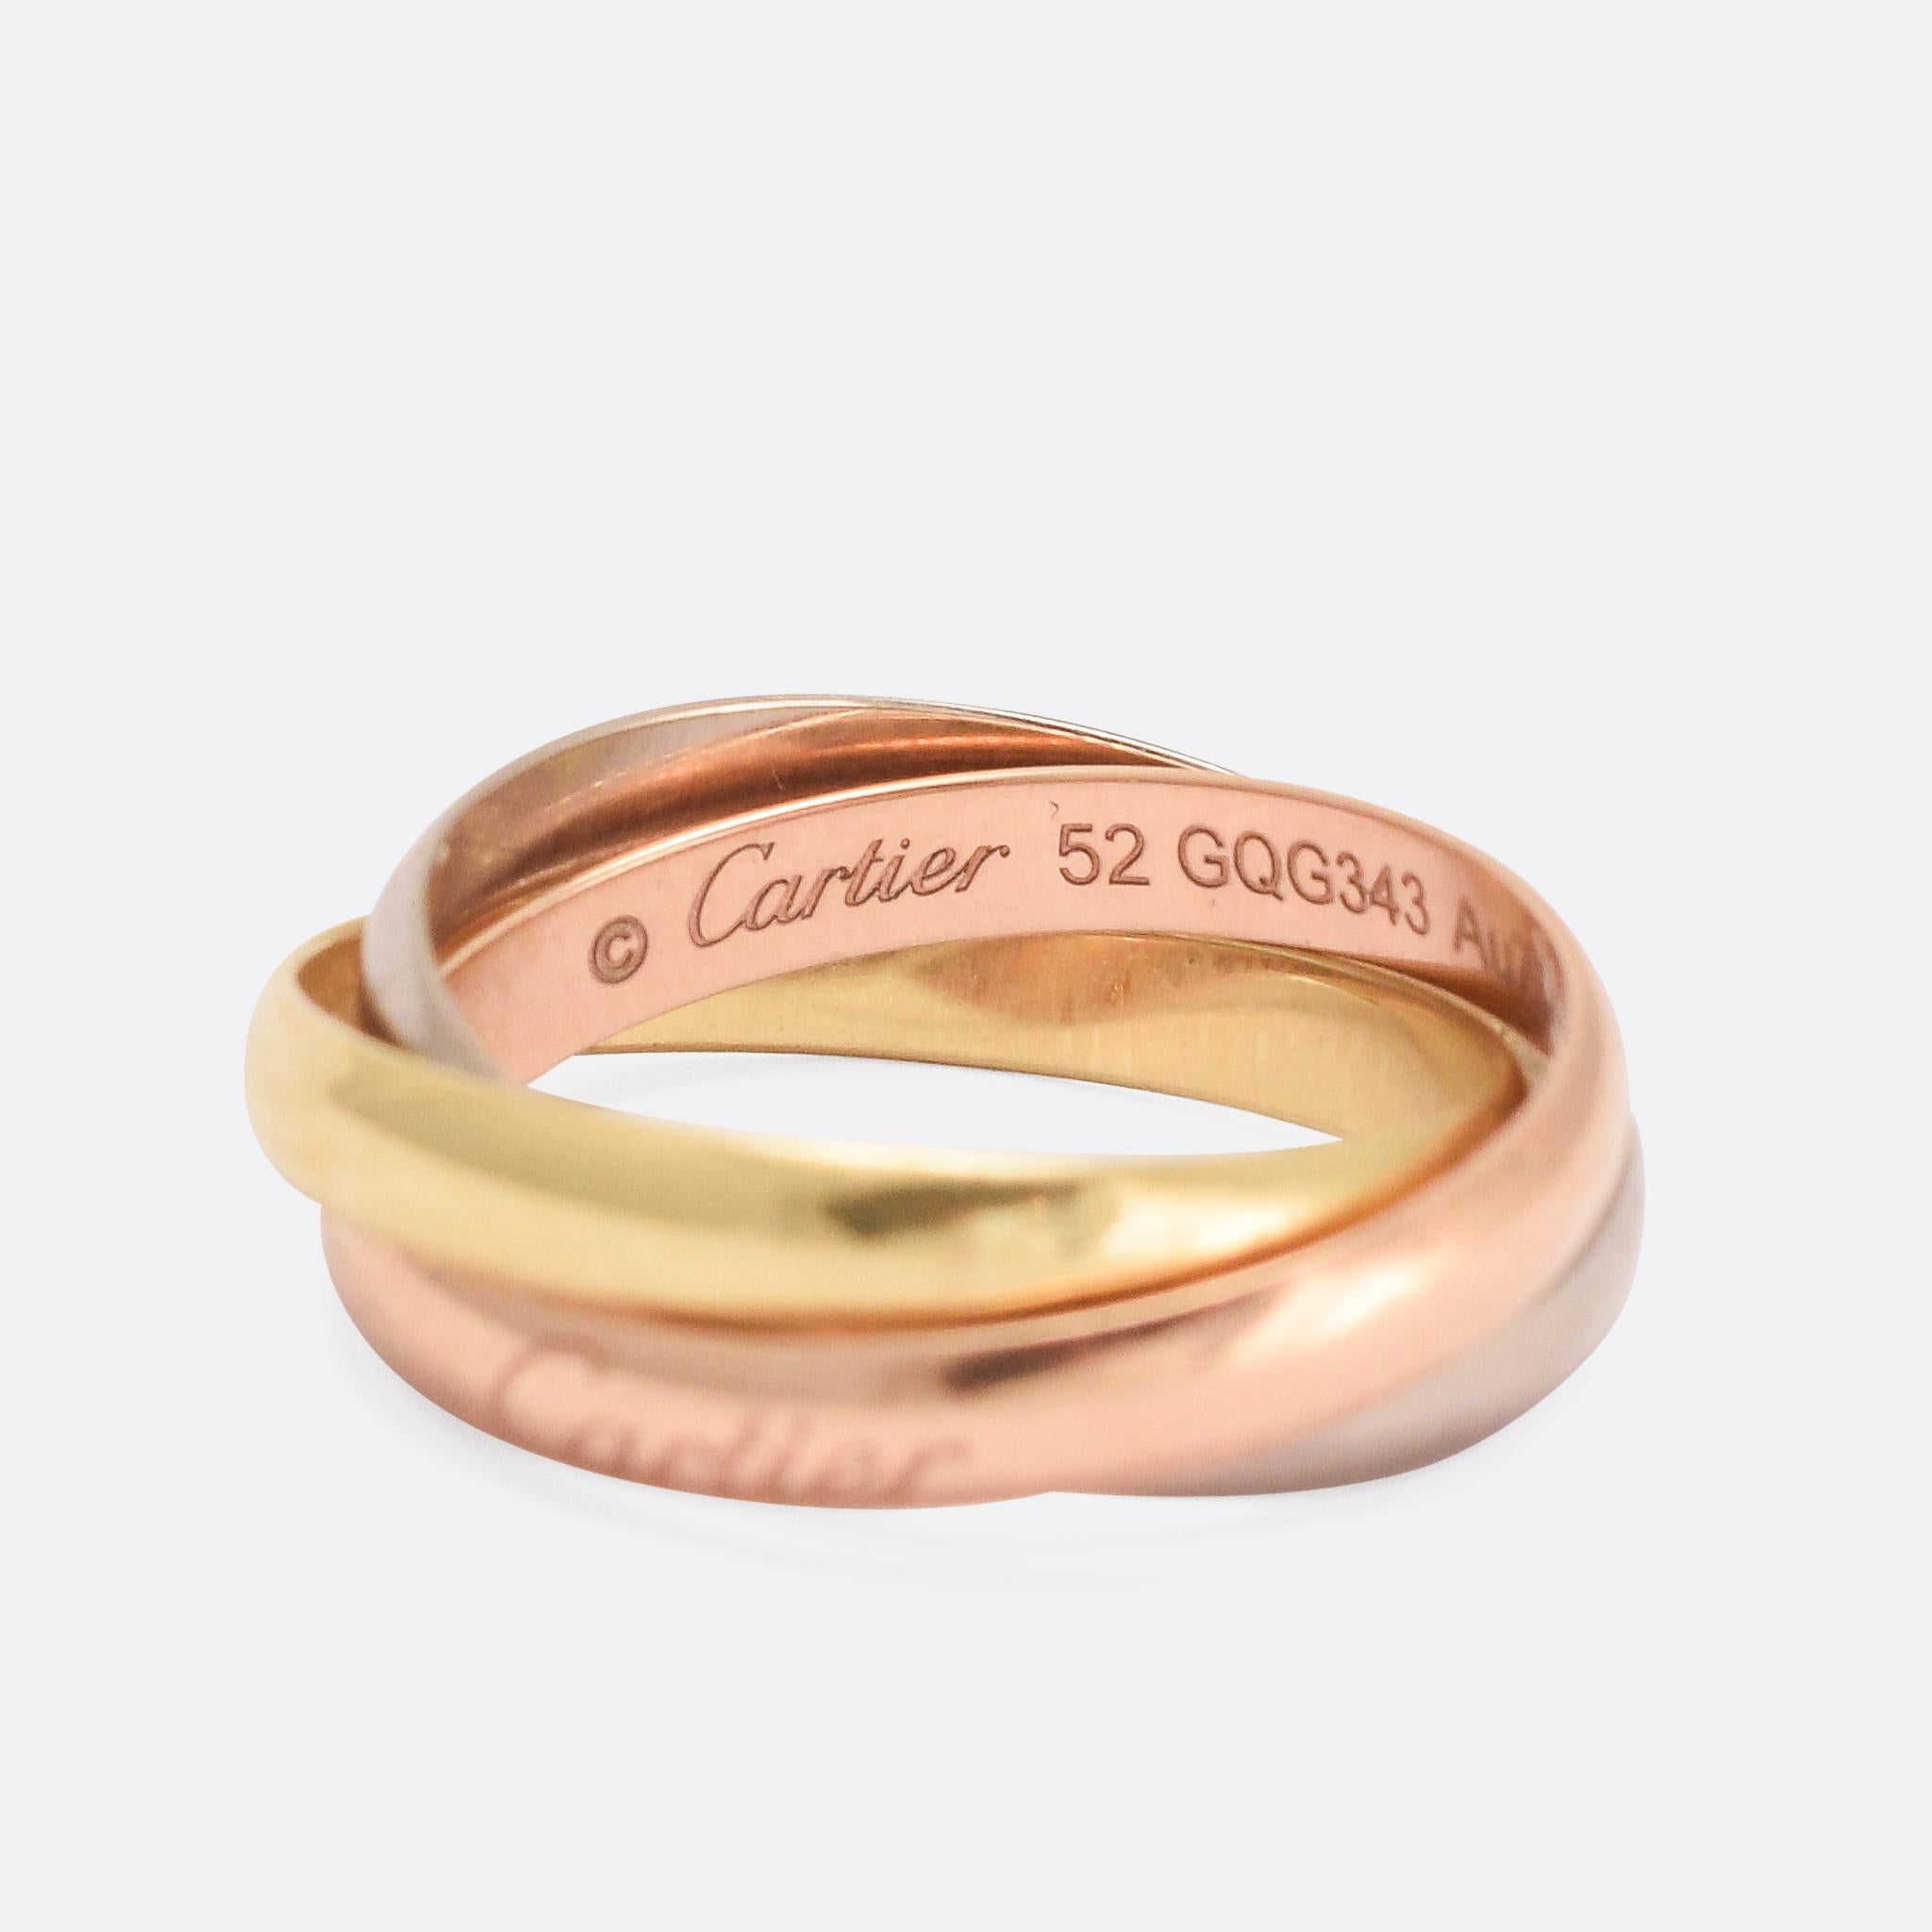 A classic Cartier Russian wedding band. It comprises three 18 karat gold bands (rose, white and yellow), interlinked to create a beautiful symbol of eternal love. It's signed Cartier 750, with the Cartier lettering to the outer rose gold band.

RING